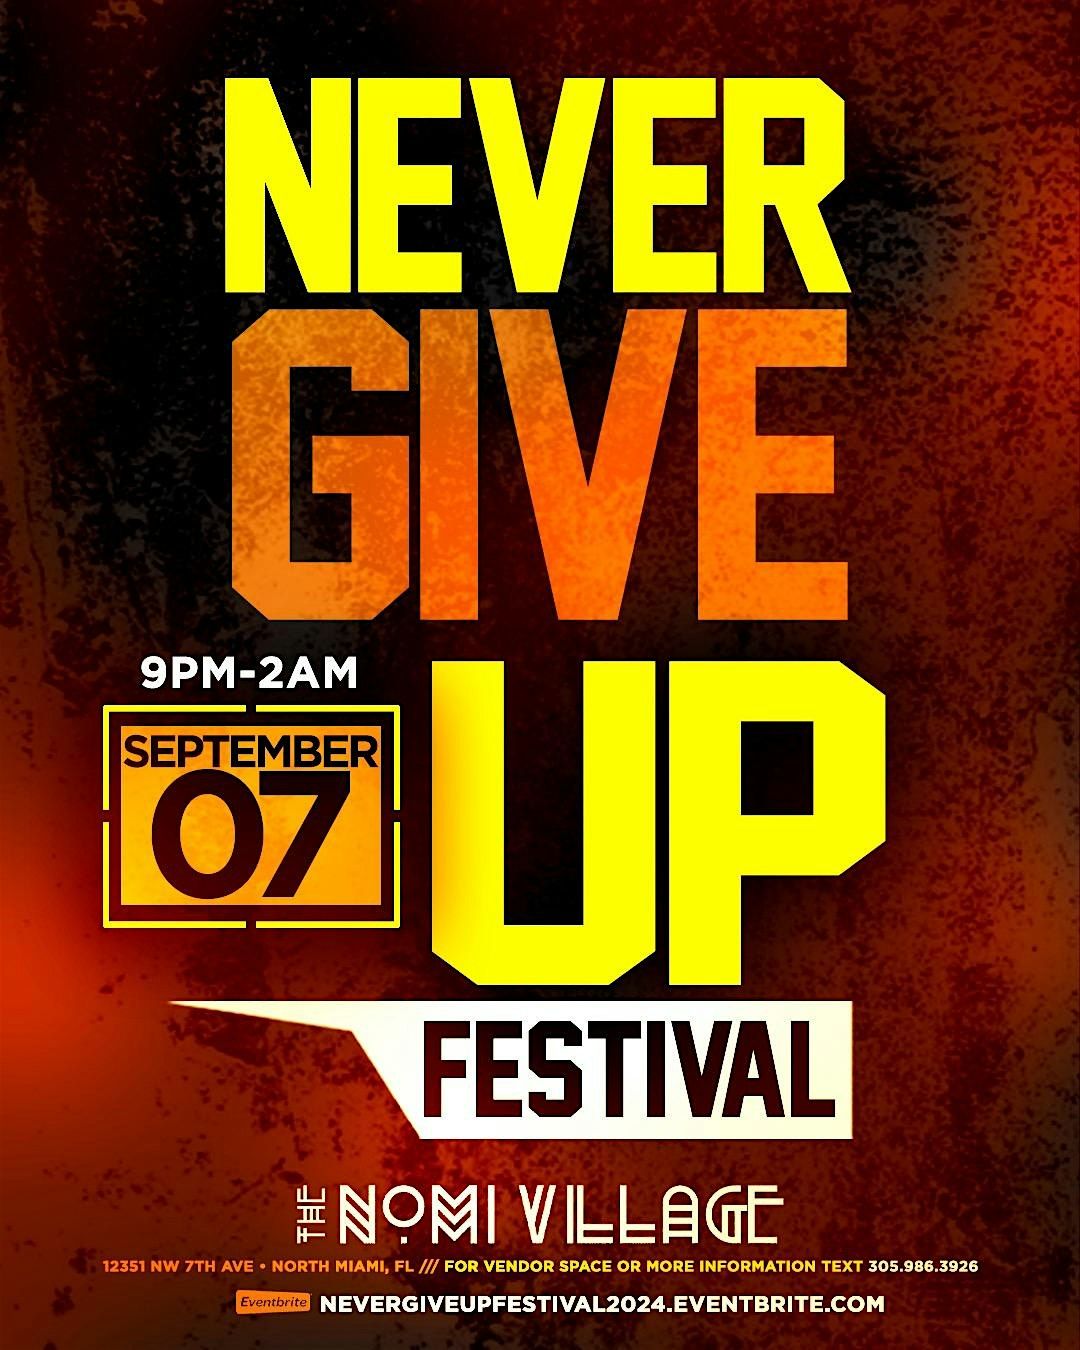 NEVER GIVE UP FESTIVAL